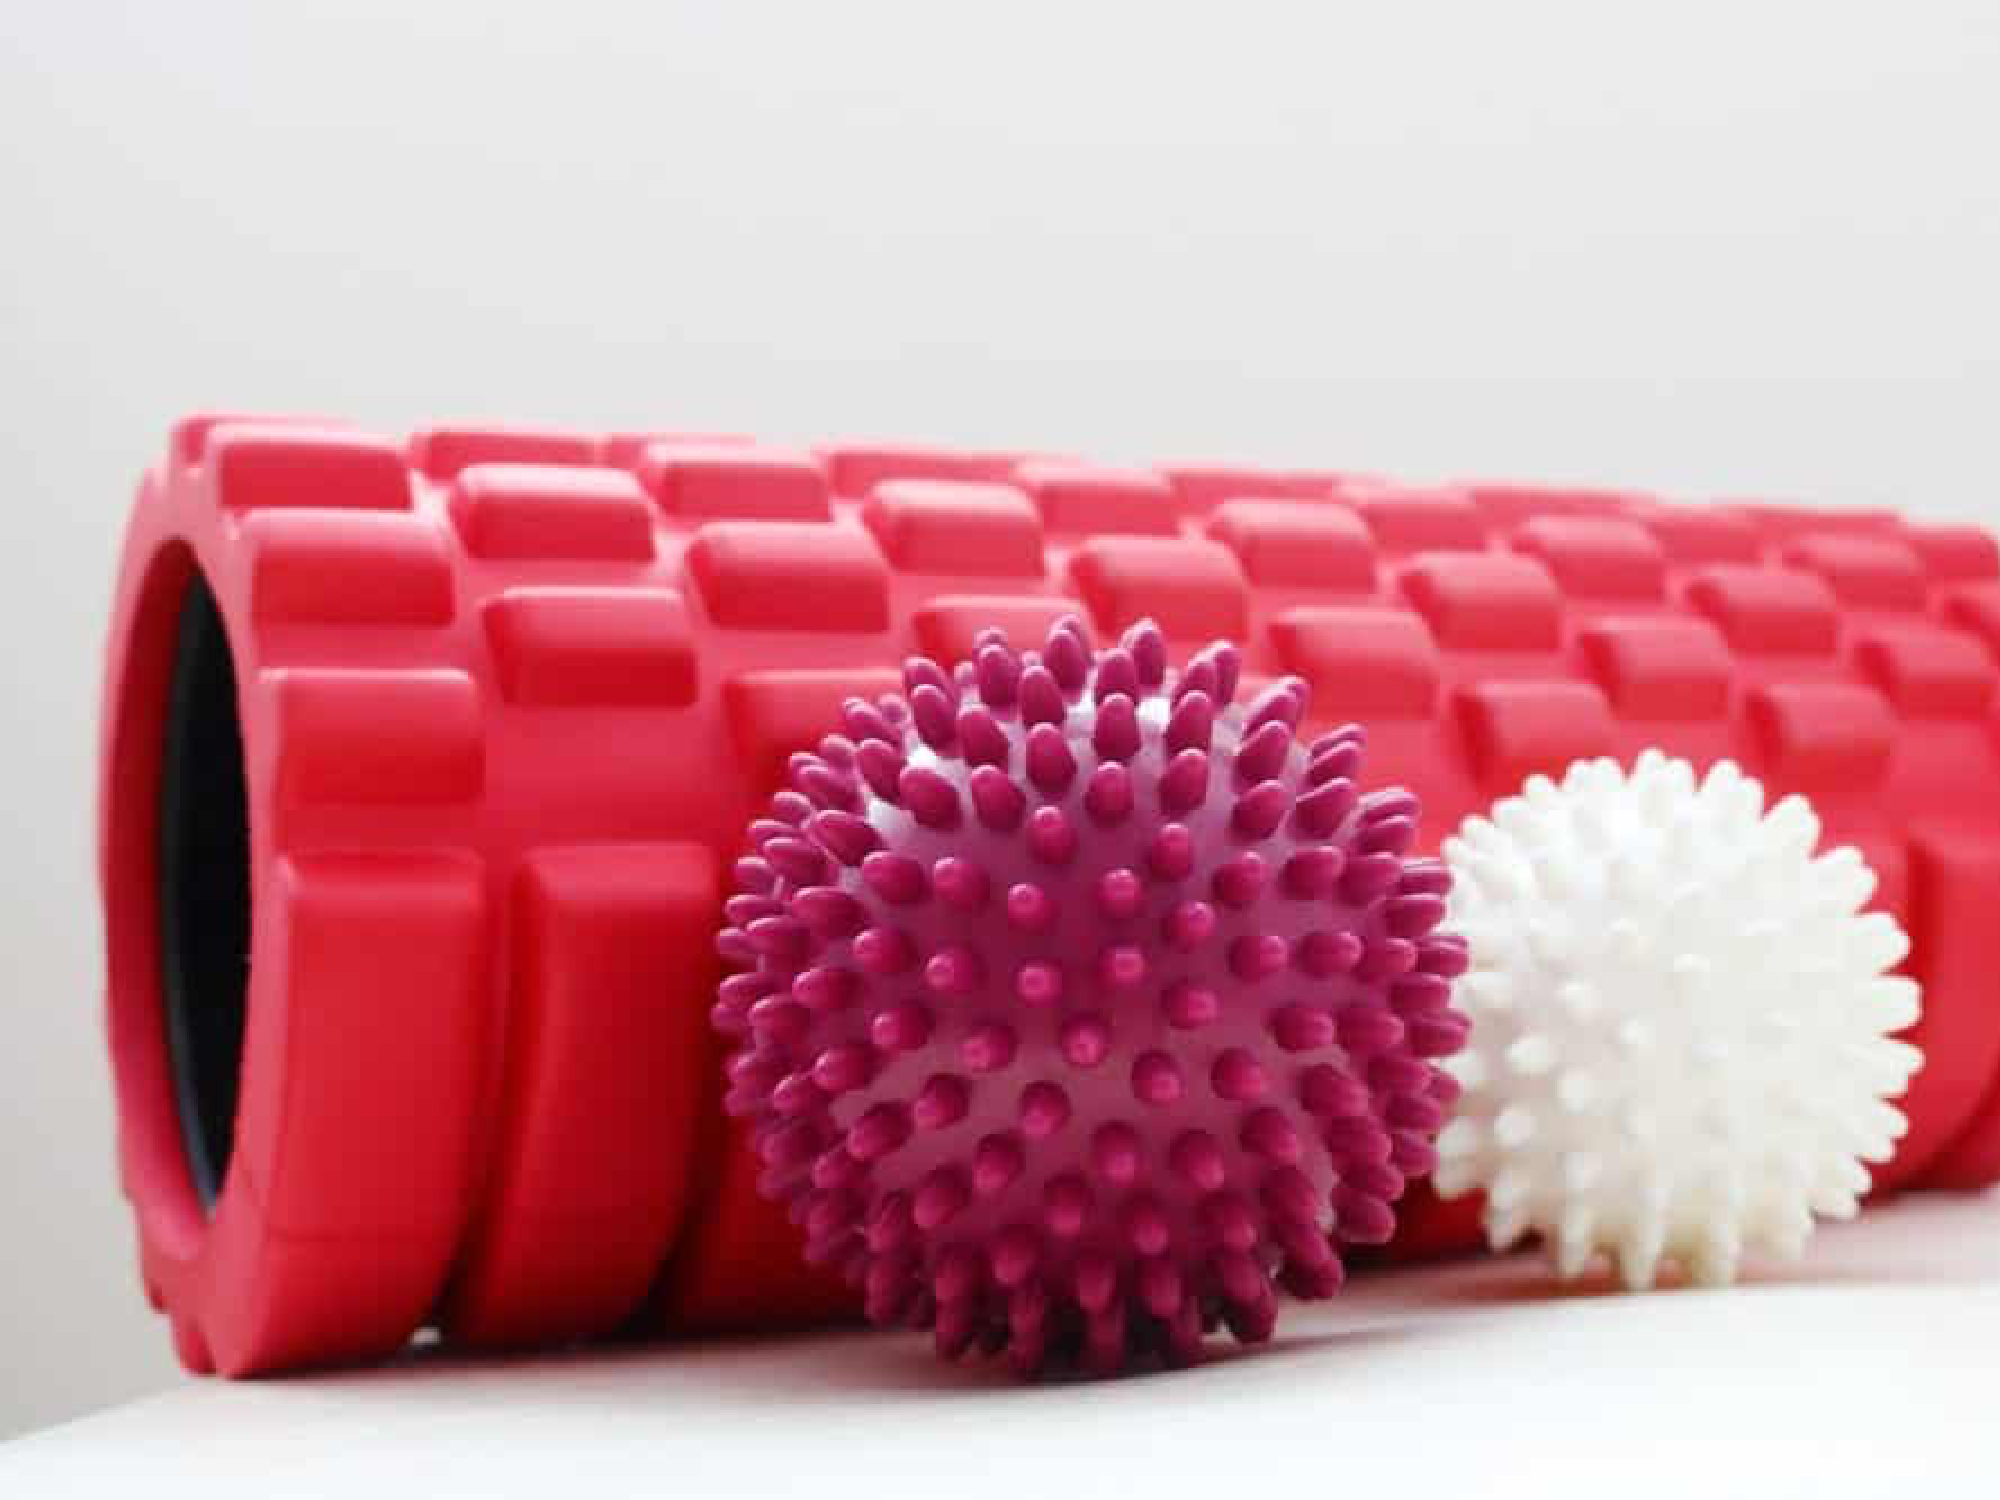 Massage Ball Vs Foam Roller What Is Best For You Met Phys Highfields Toowoomba And Crows